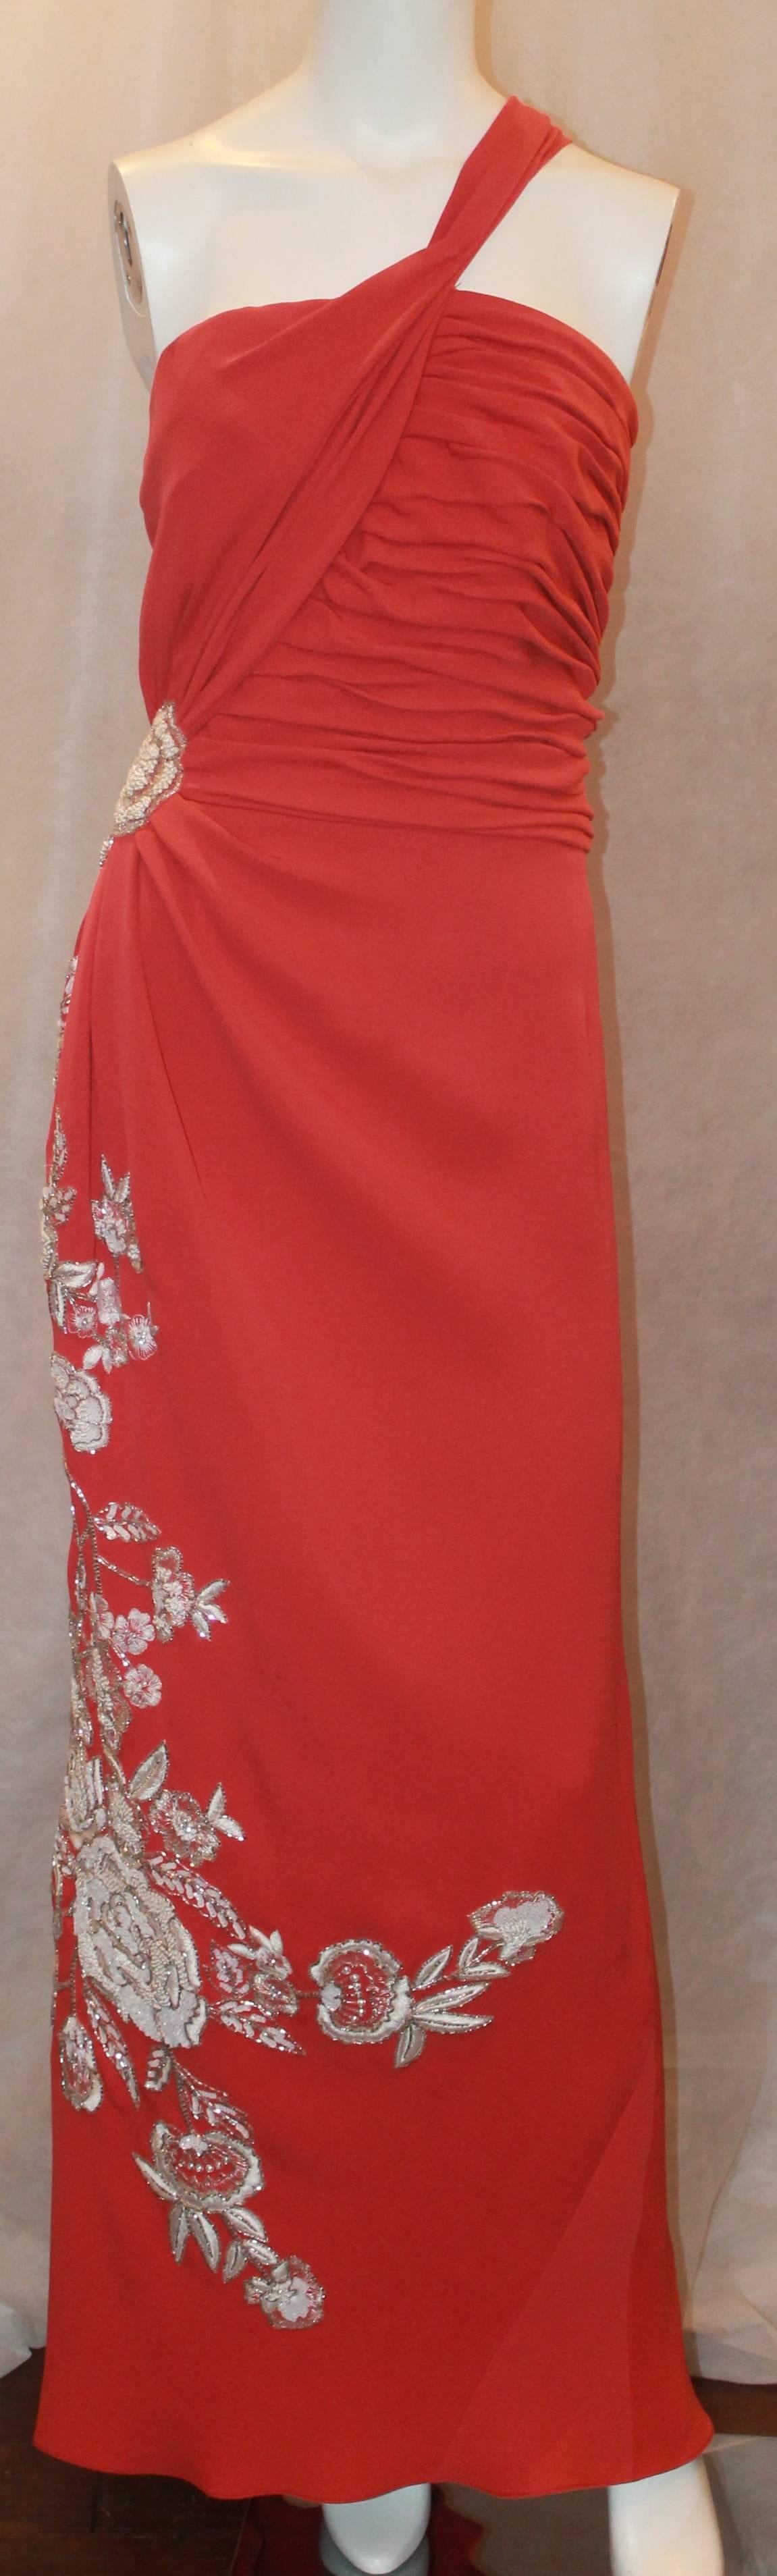 Naeem Khan Coral Silk One Shoulder Gown w/ White Floral Beading & Shawl - 12.  This beautiful gown is in excellent condition.  It features an intricately beautiful white floral beading cinched on the right side of the gown, a ruched, and an inbuilt